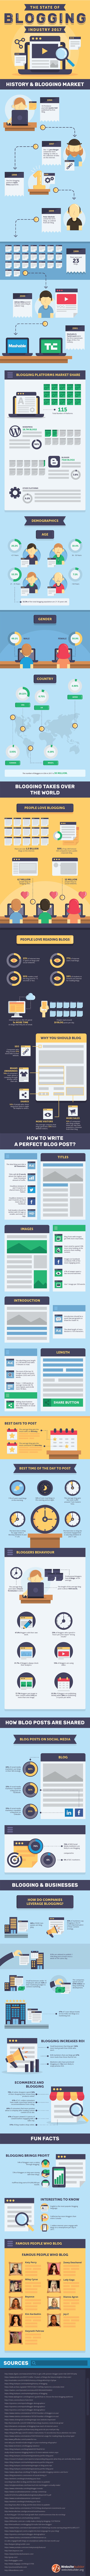 The Benefits of Blogging 20+ Stats Business Owners Need to Know Infographic